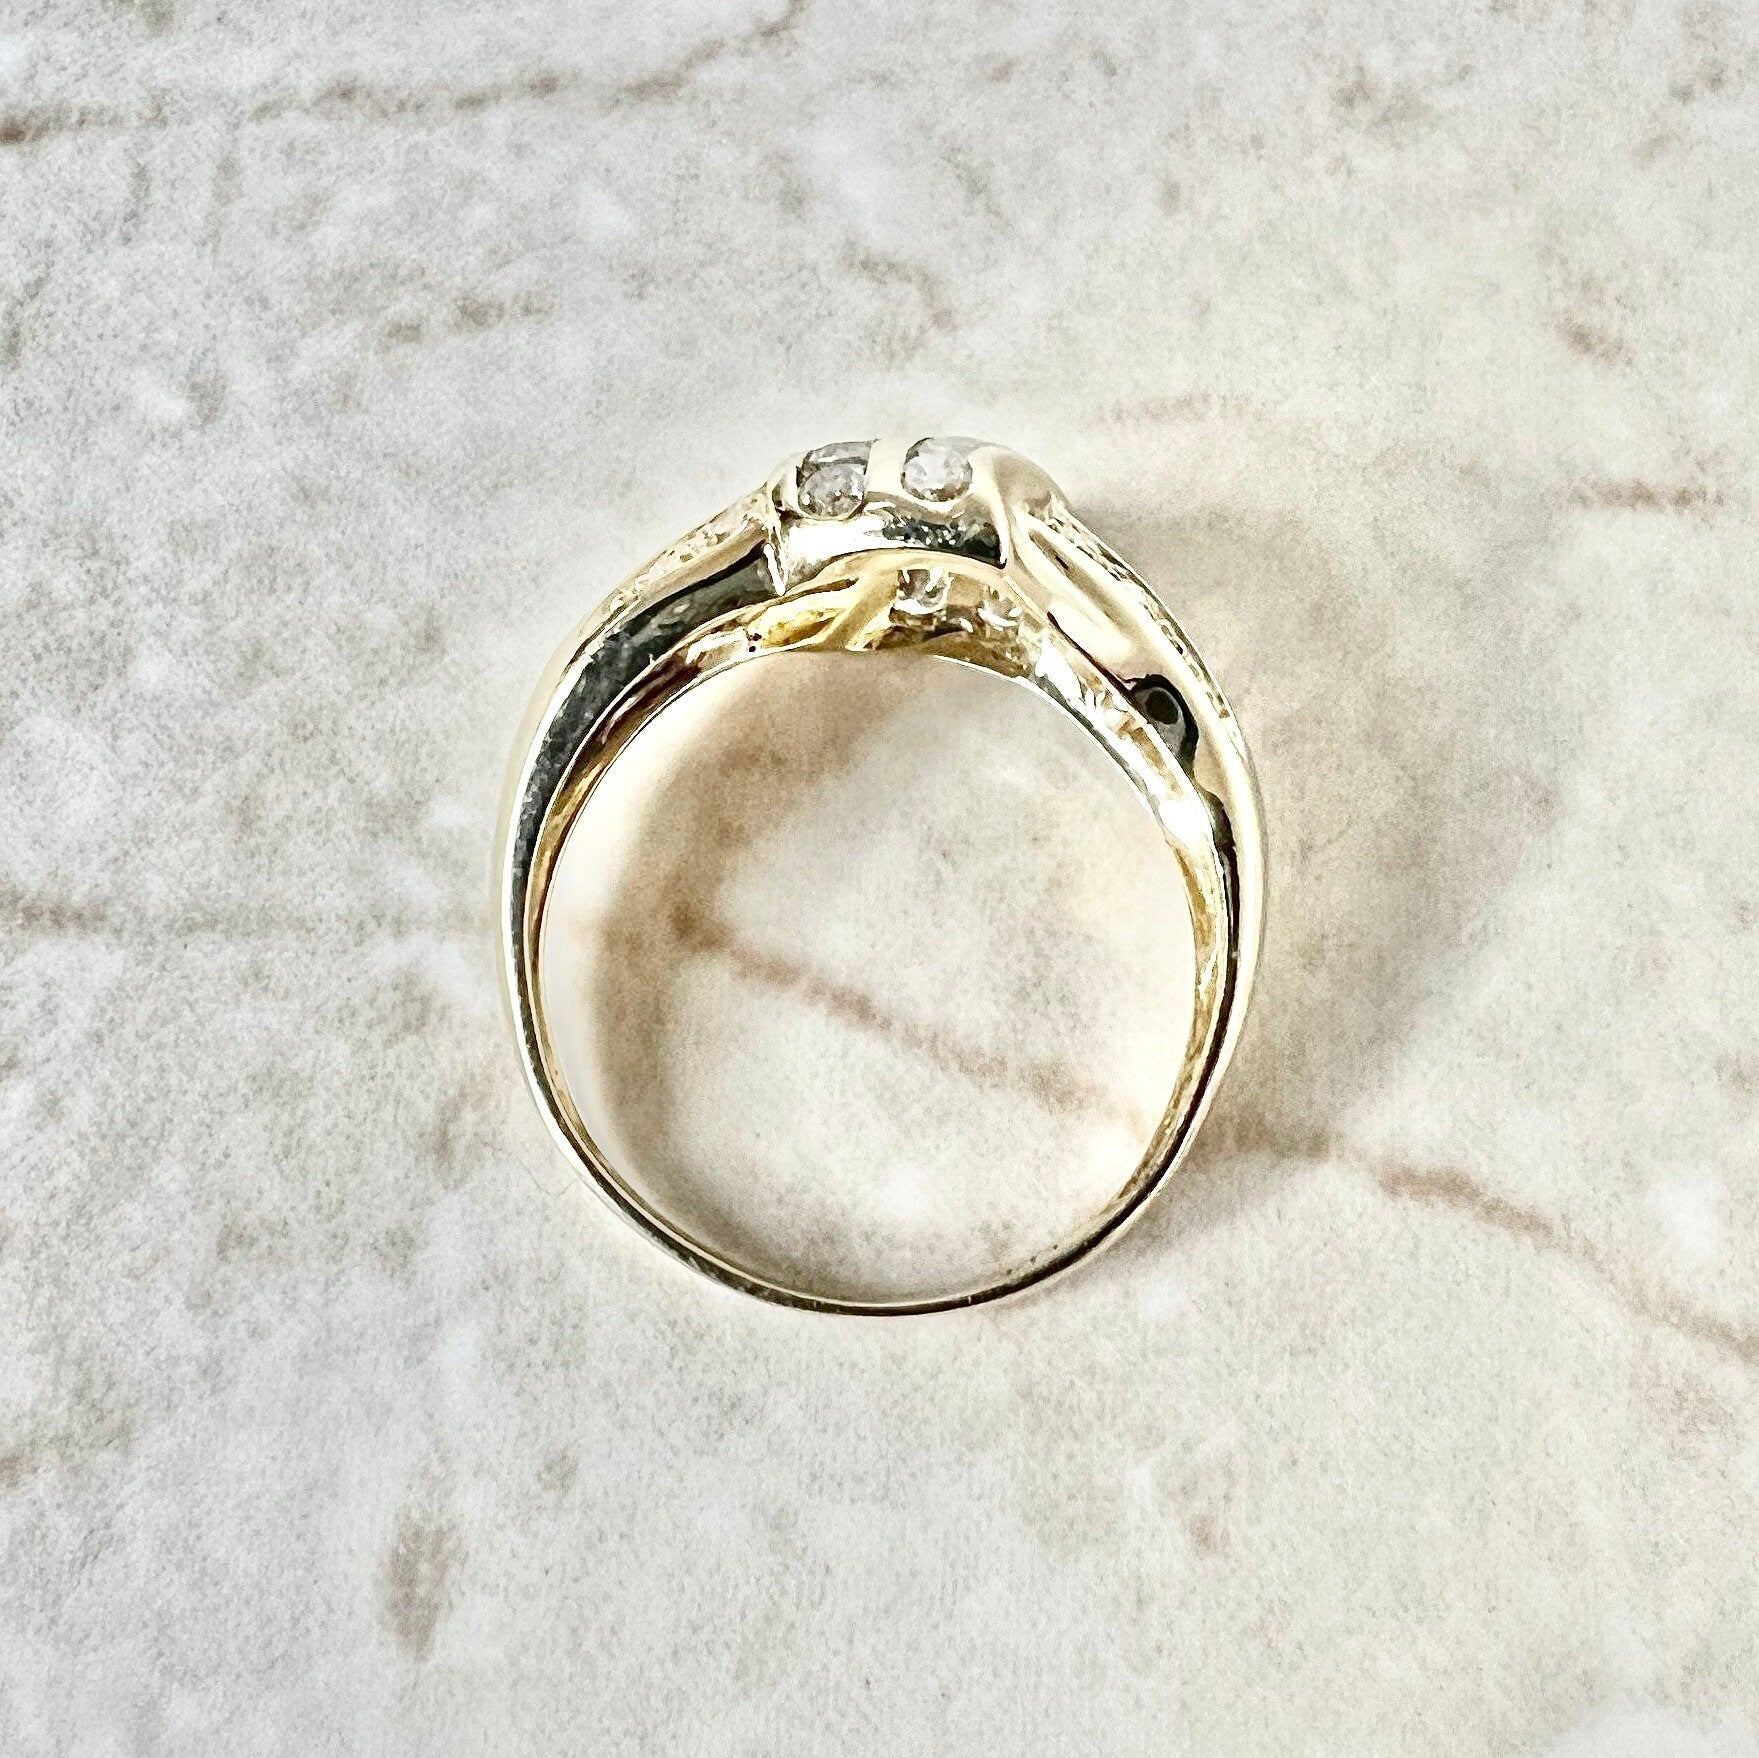 1.11 CT 18K Vintage Diamond Cocktail Ring - Yellow Gold Diamond Ring - Diamond Wedding Ring - Best Gifts For Her - Anniversary Ring For Her